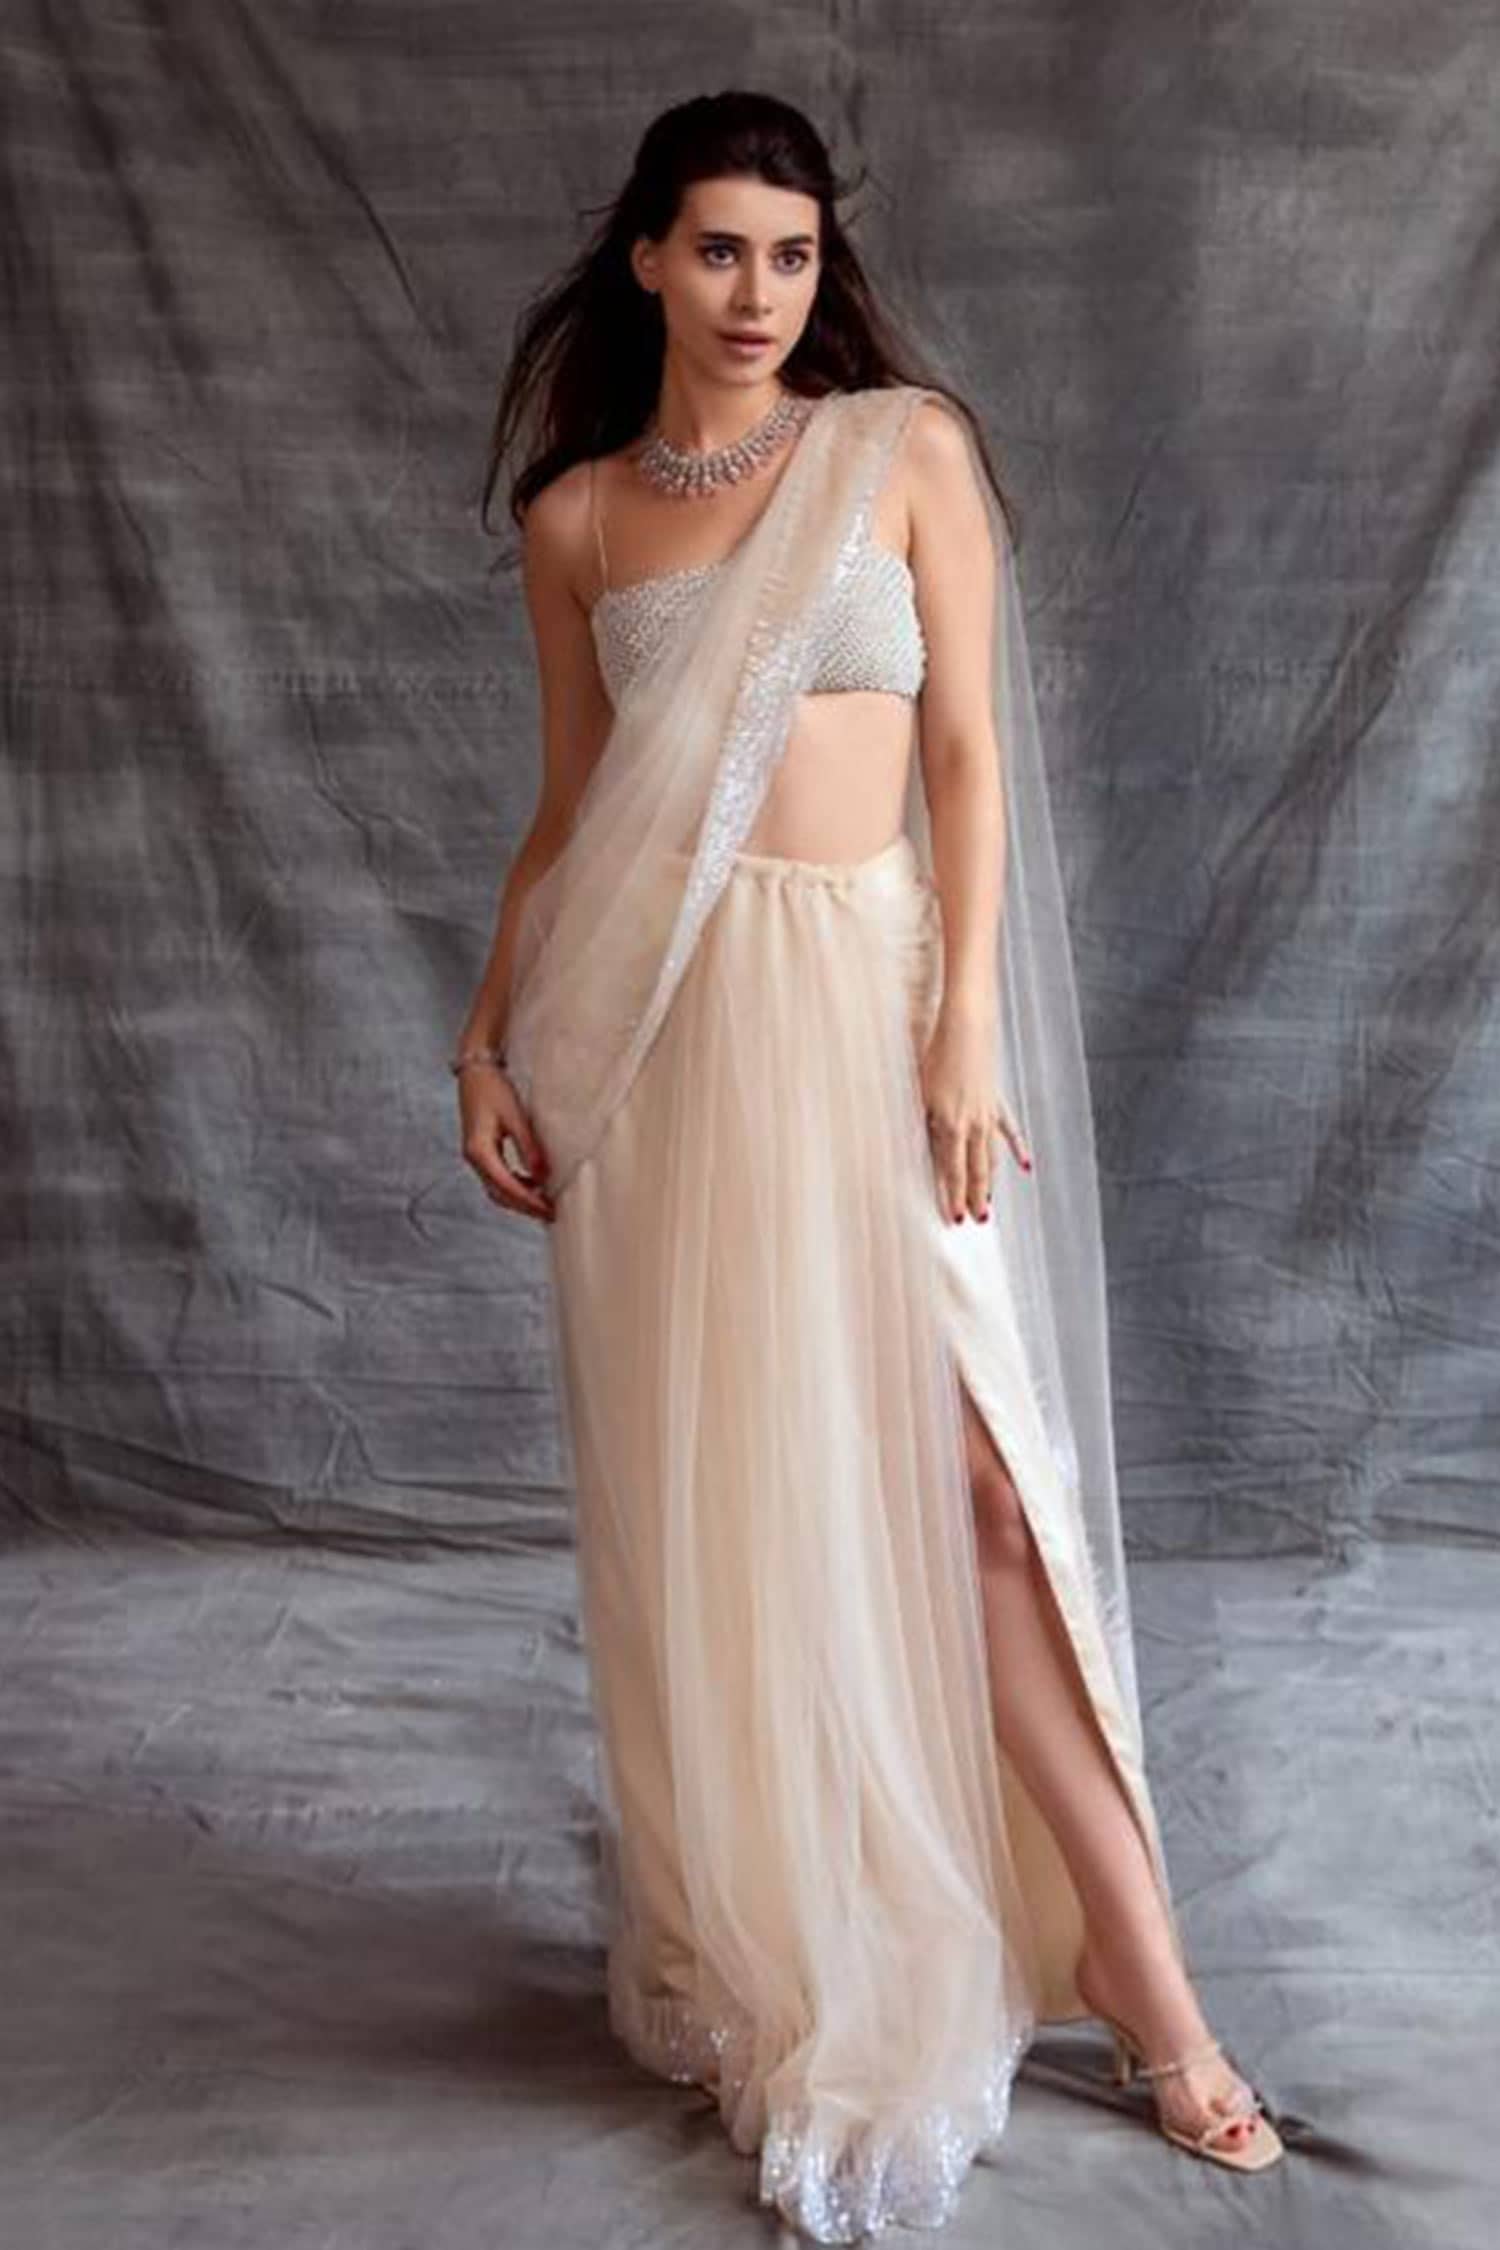 Shehlaa Khan Beige Tulle Pre-draped Saree With Embellished Blouse